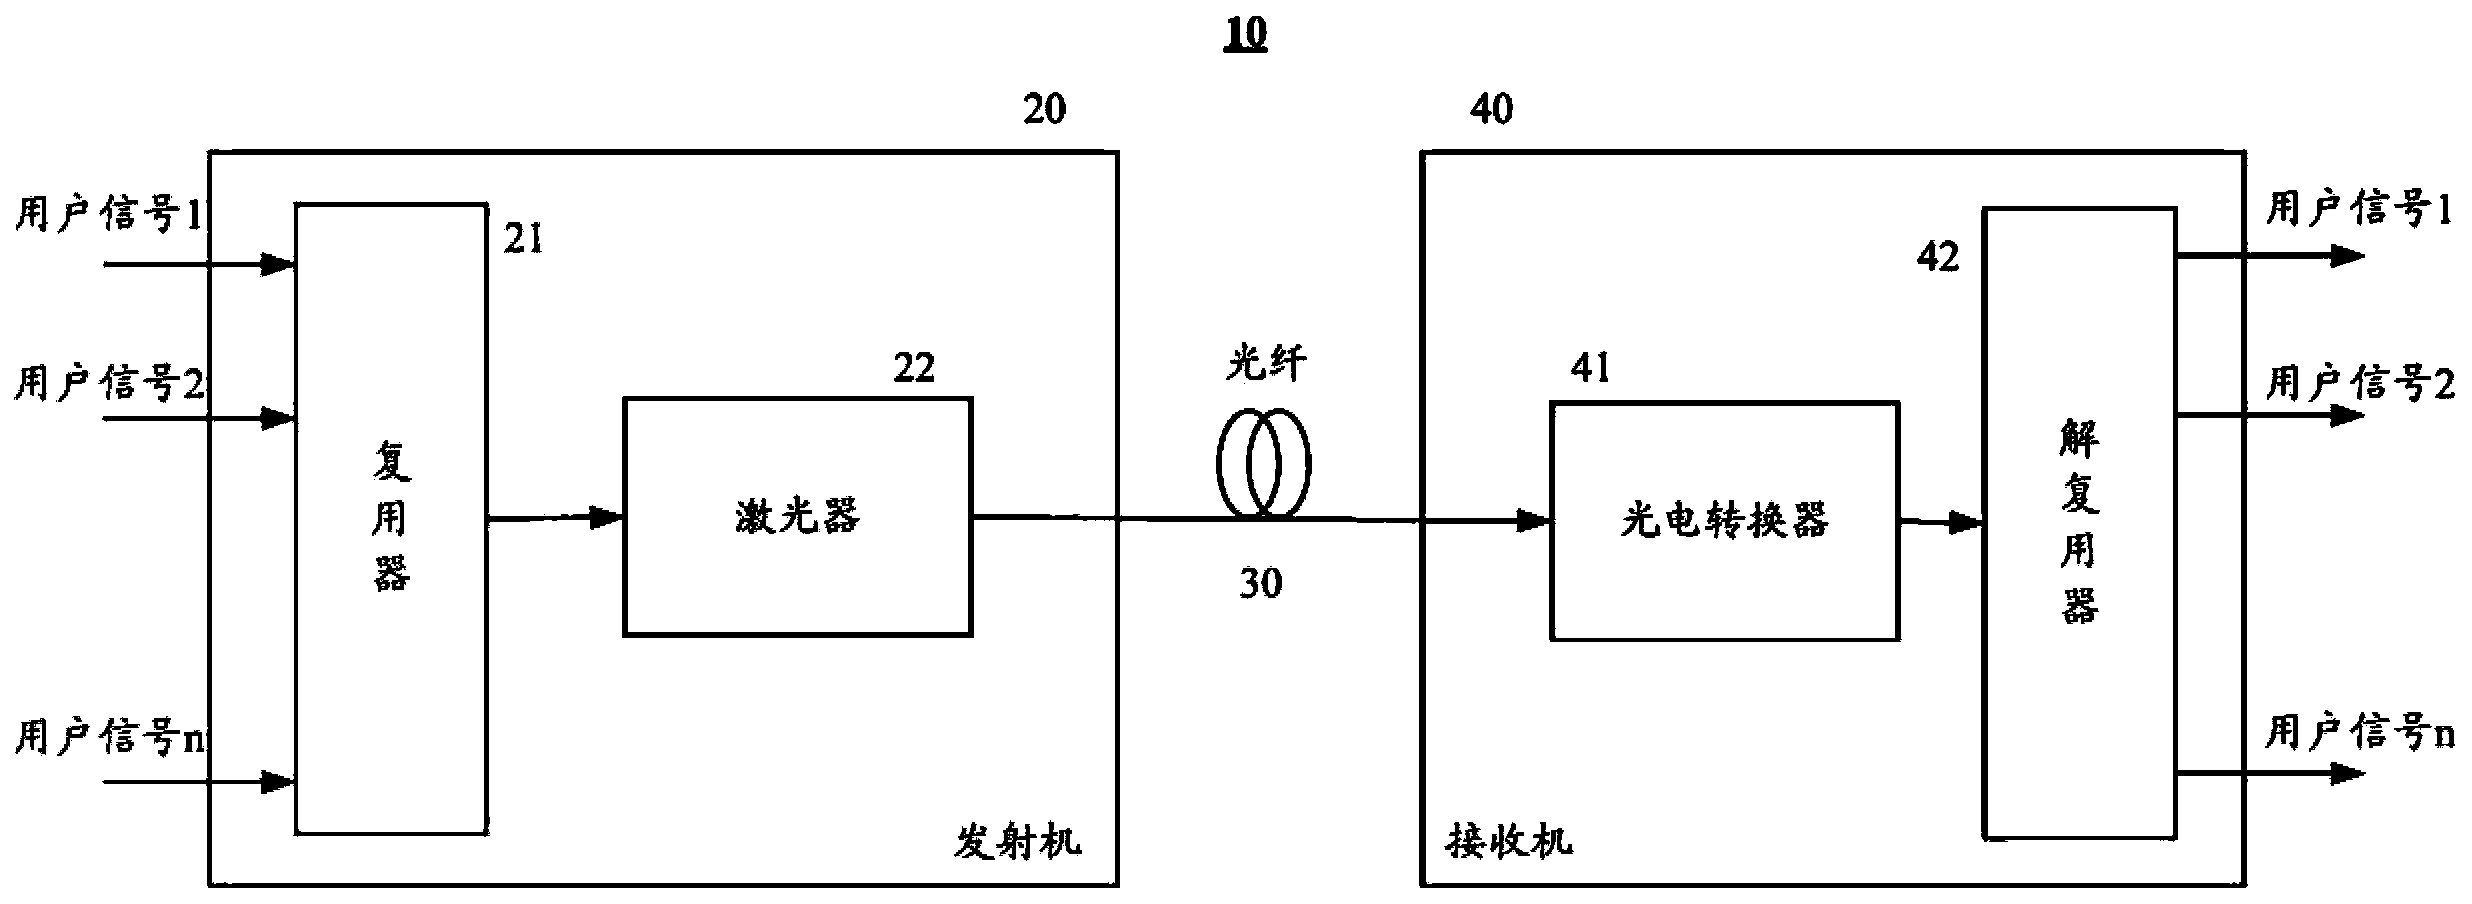 Multiplexer and demultiplexer, transmitter and receiver, optical fiber communication system and methods